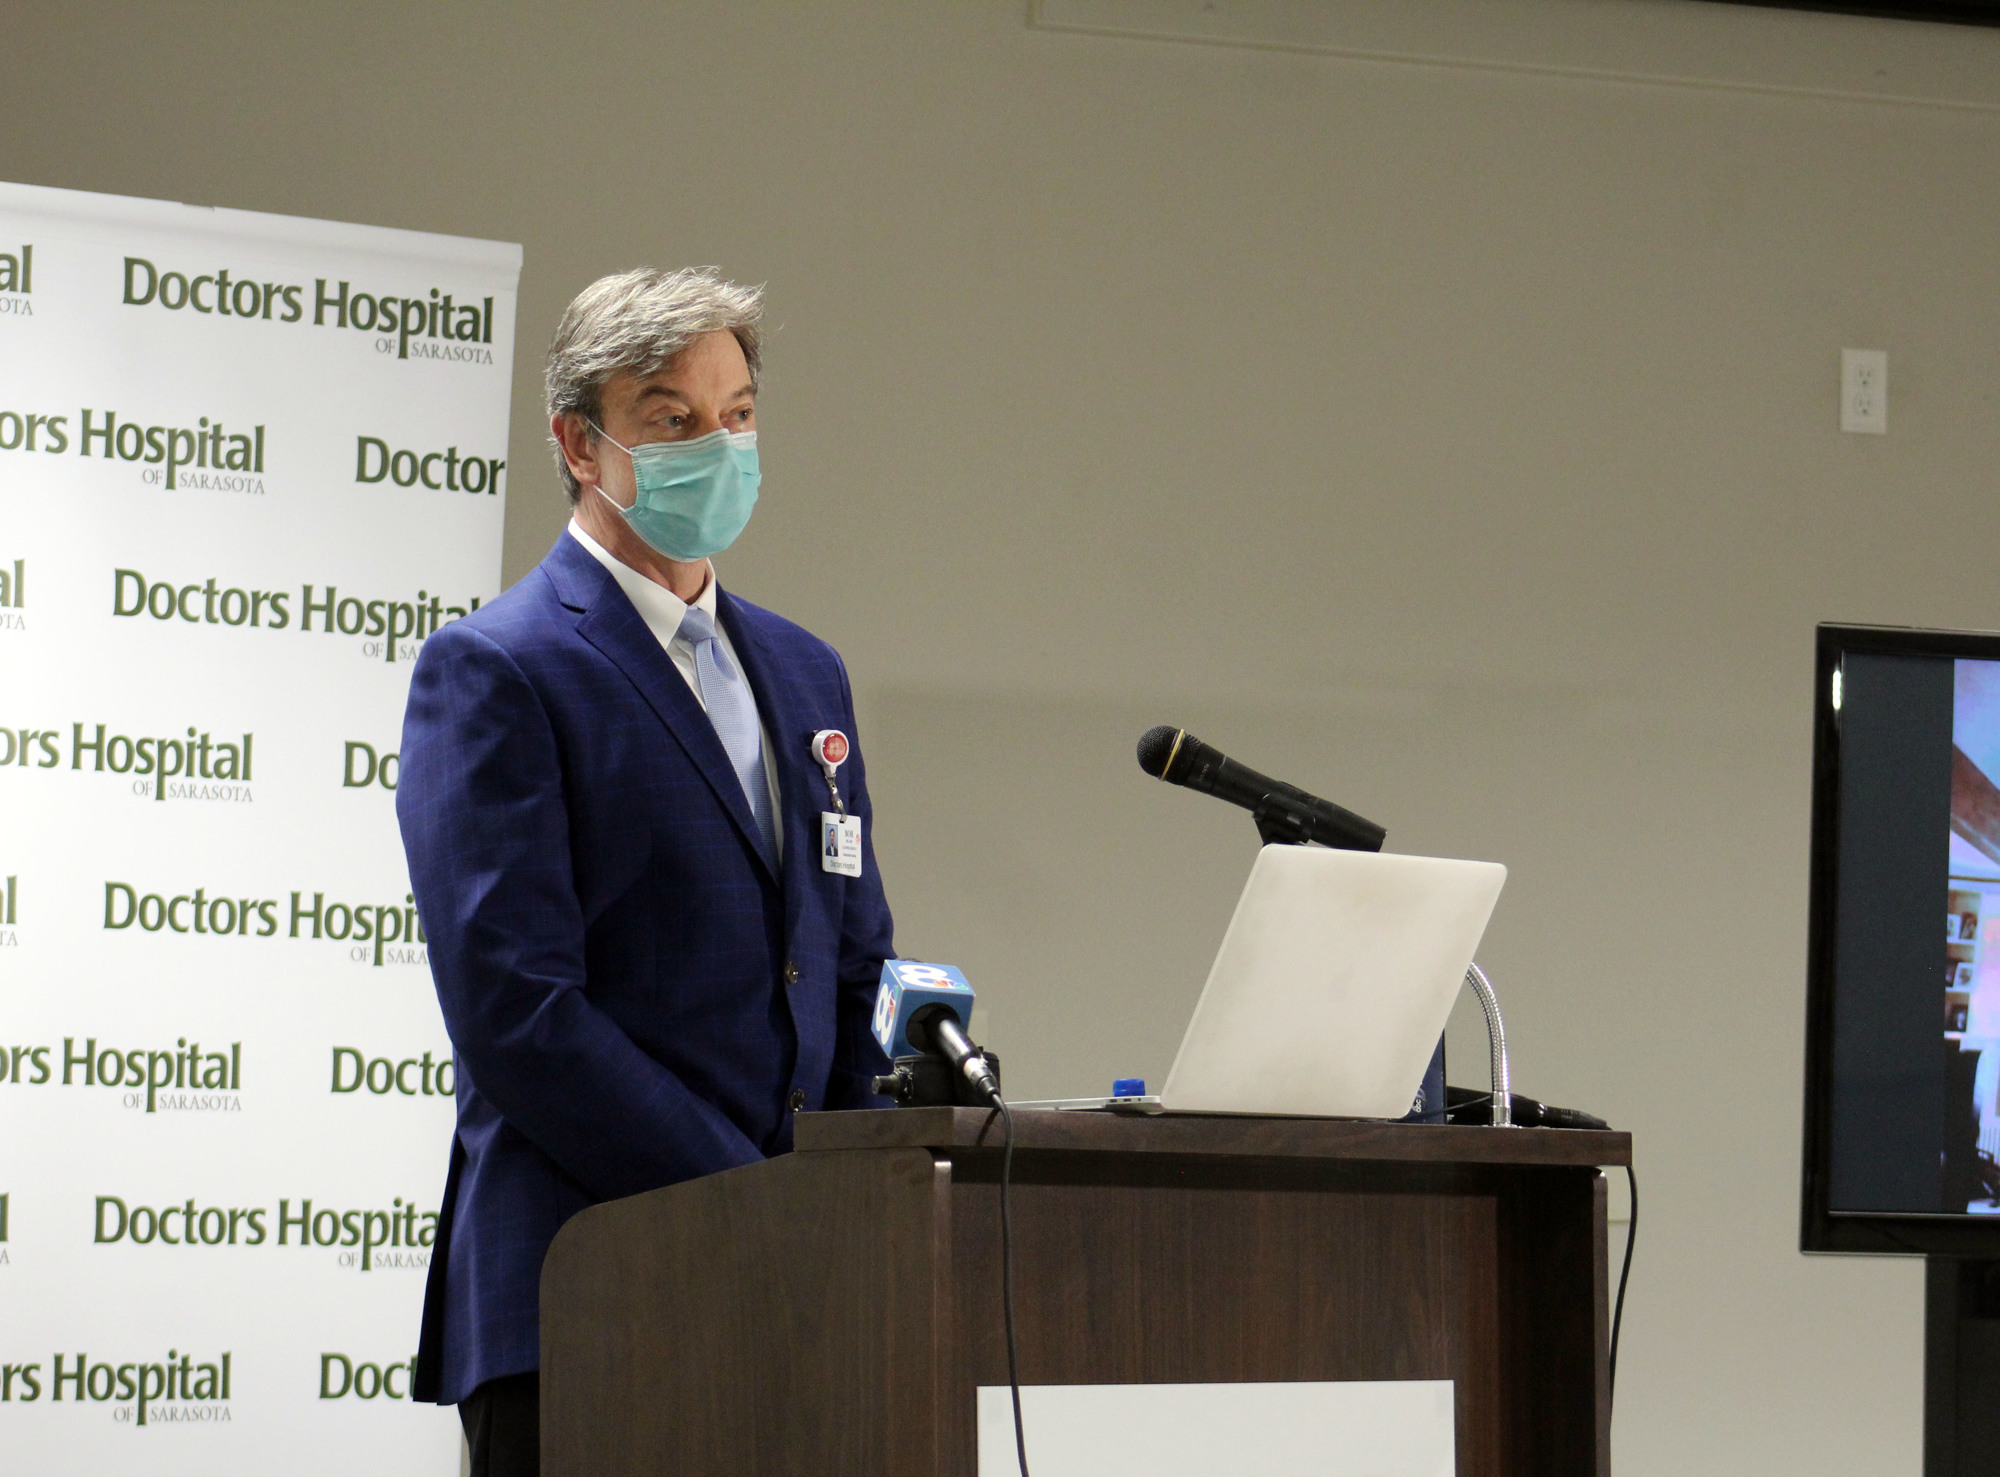 CEO Robert Meade said those who have been vaccinated should still continue to wear masks.